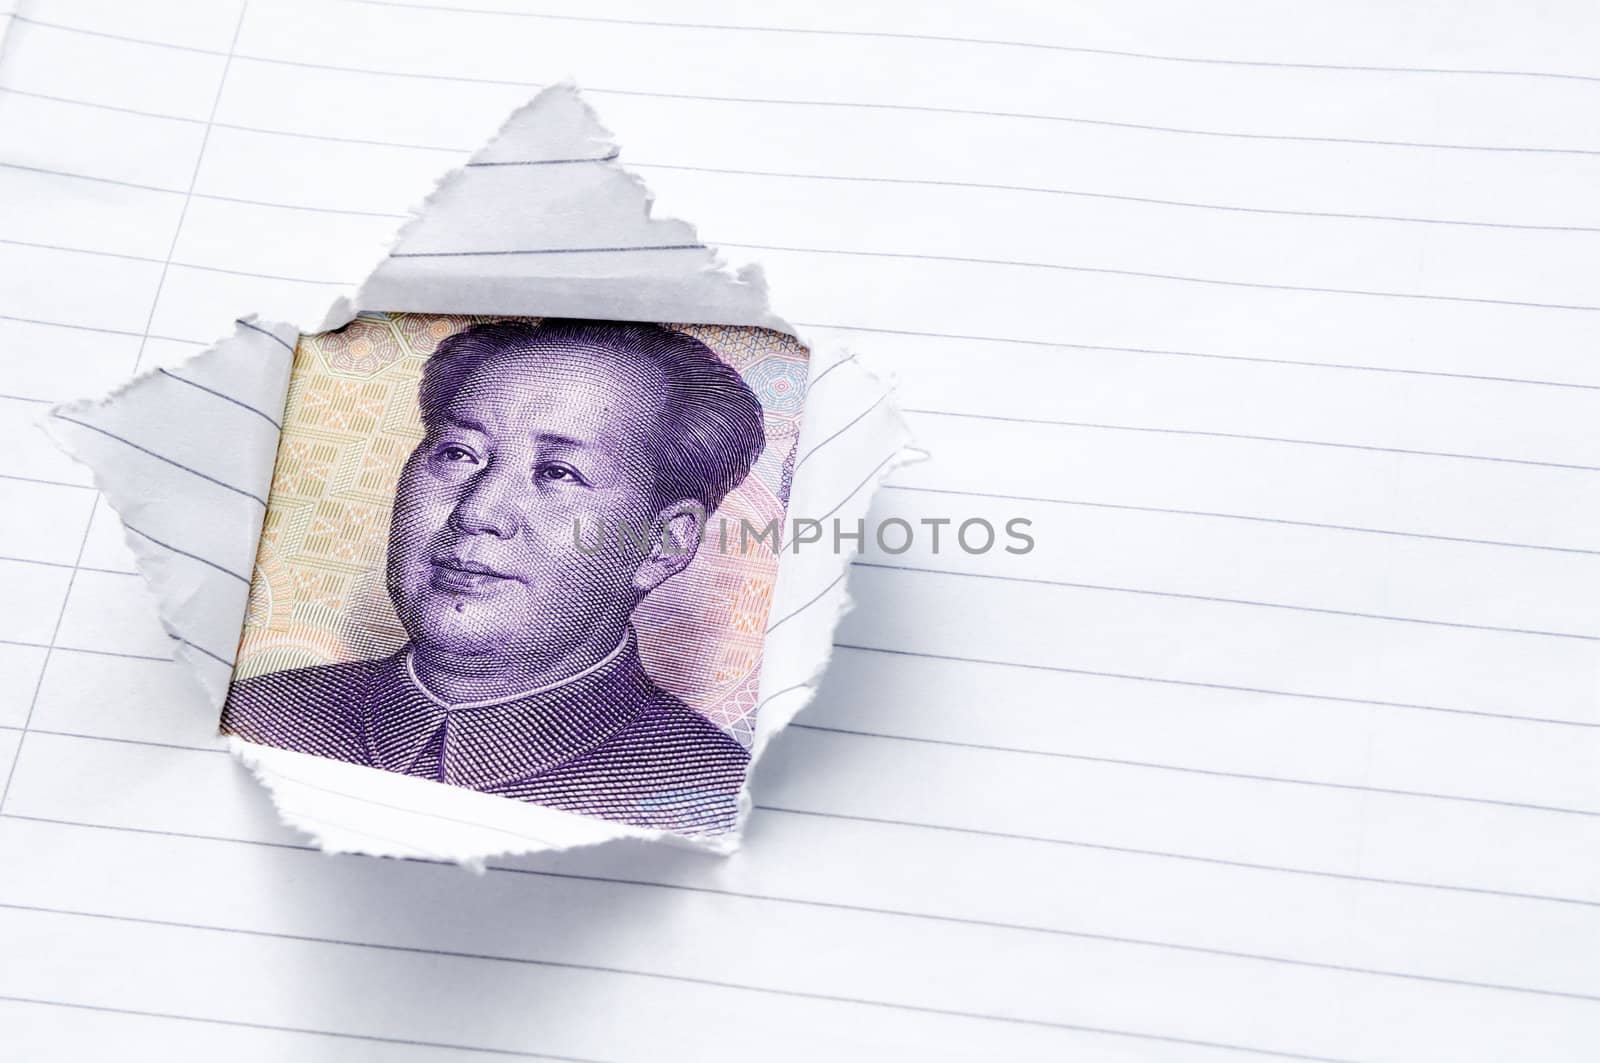 Lined paper torn with window opening showing Chinese currency, the Yuan.